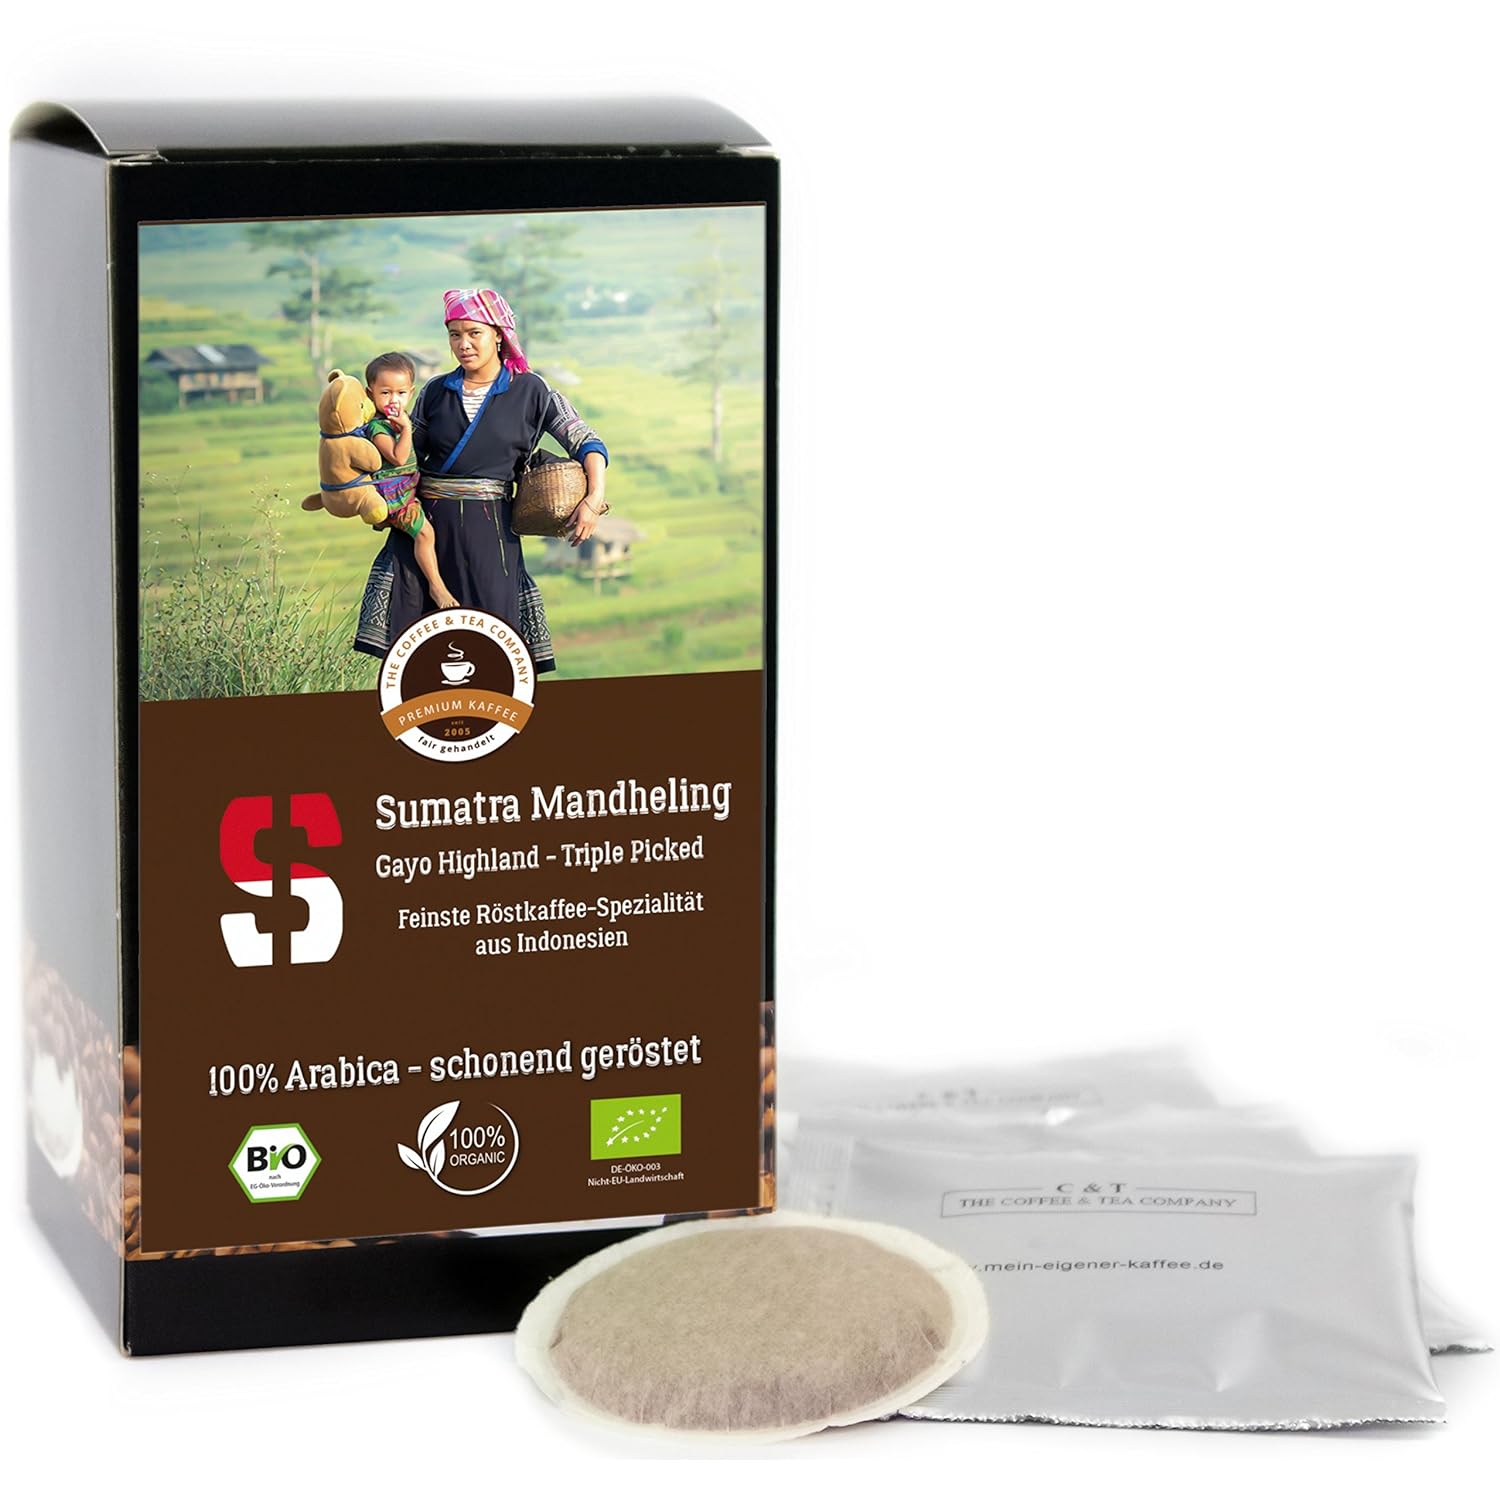 Coffee Globetrotter - Sumatra Mandheling Gayo Highland - Organic - 50 Premium Coffee Pods - for Senseo Coffee Machine - Top Coffee - Roasted Coffee from Organic Cultivation